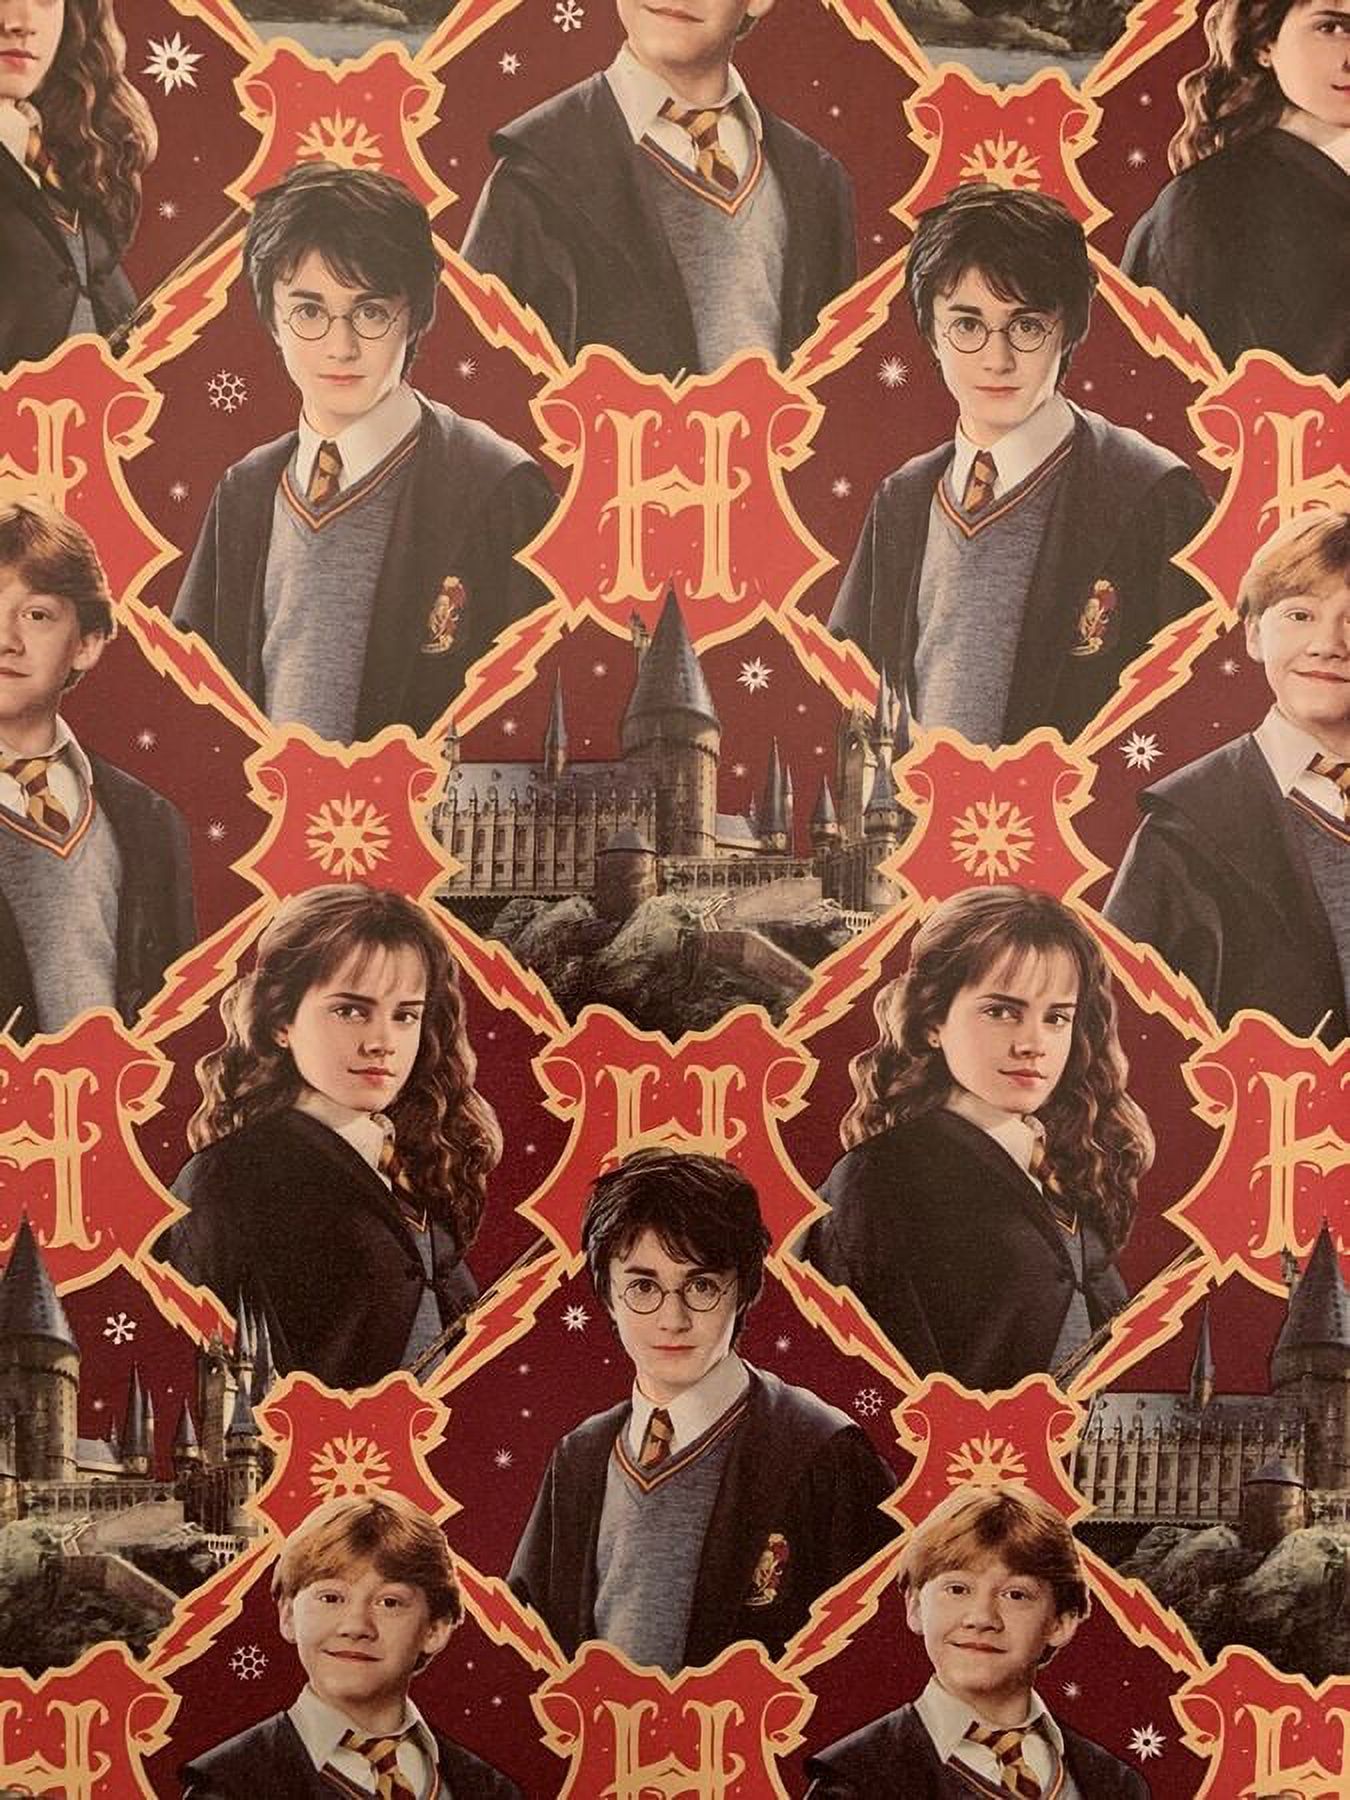 Harry Potter Holiday Wrapping Paper Christmas Gift Wrap - 70 sq. ft.